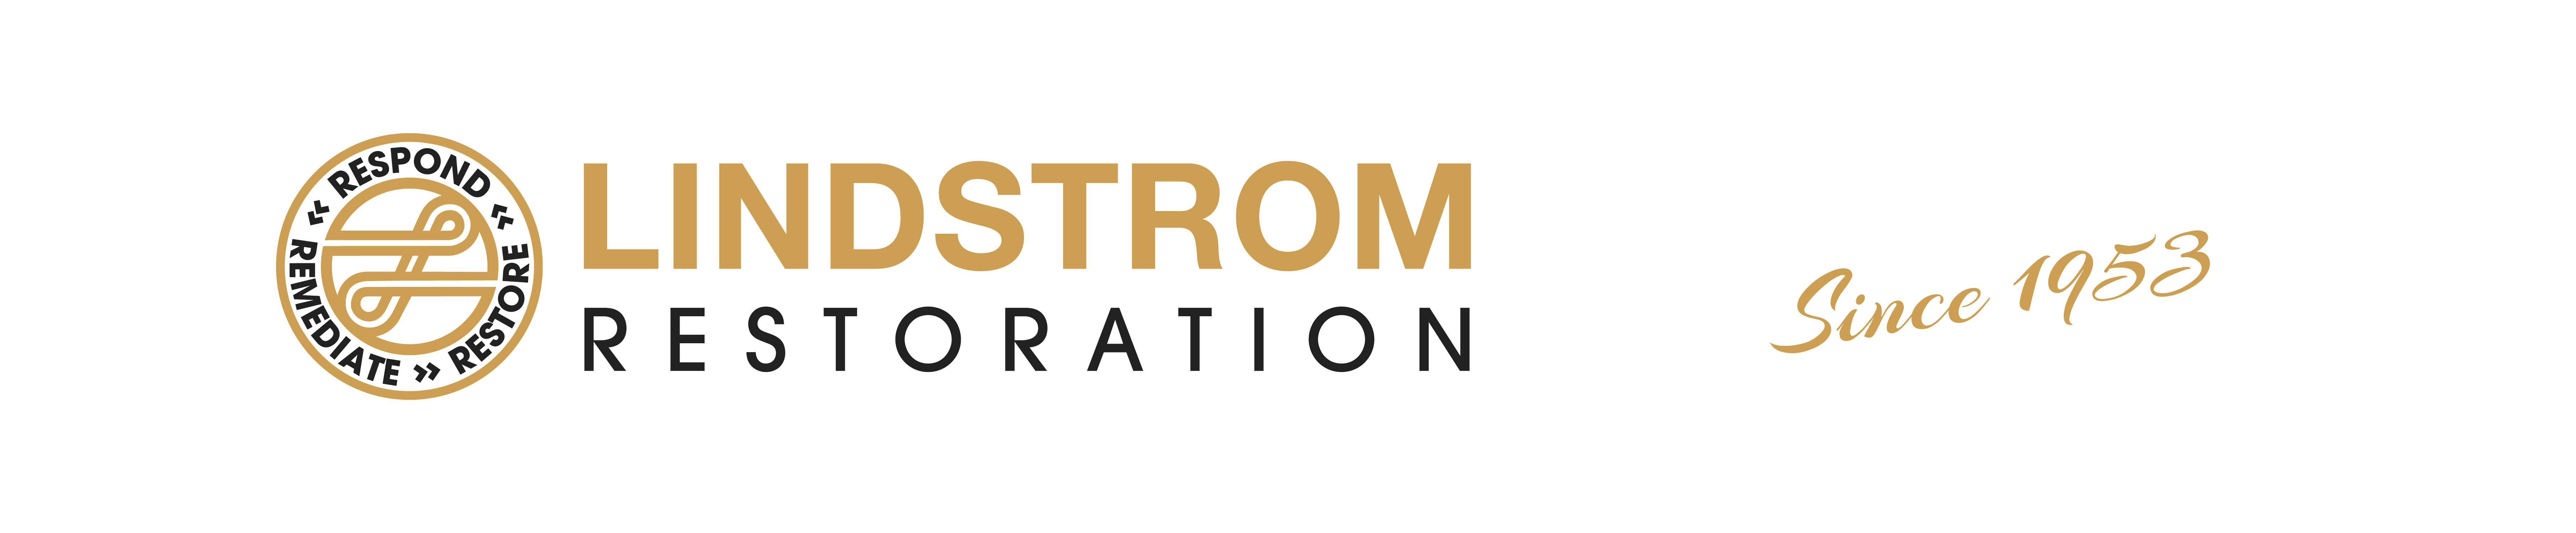 Lindstrom Cleaning & Construction, Inc.